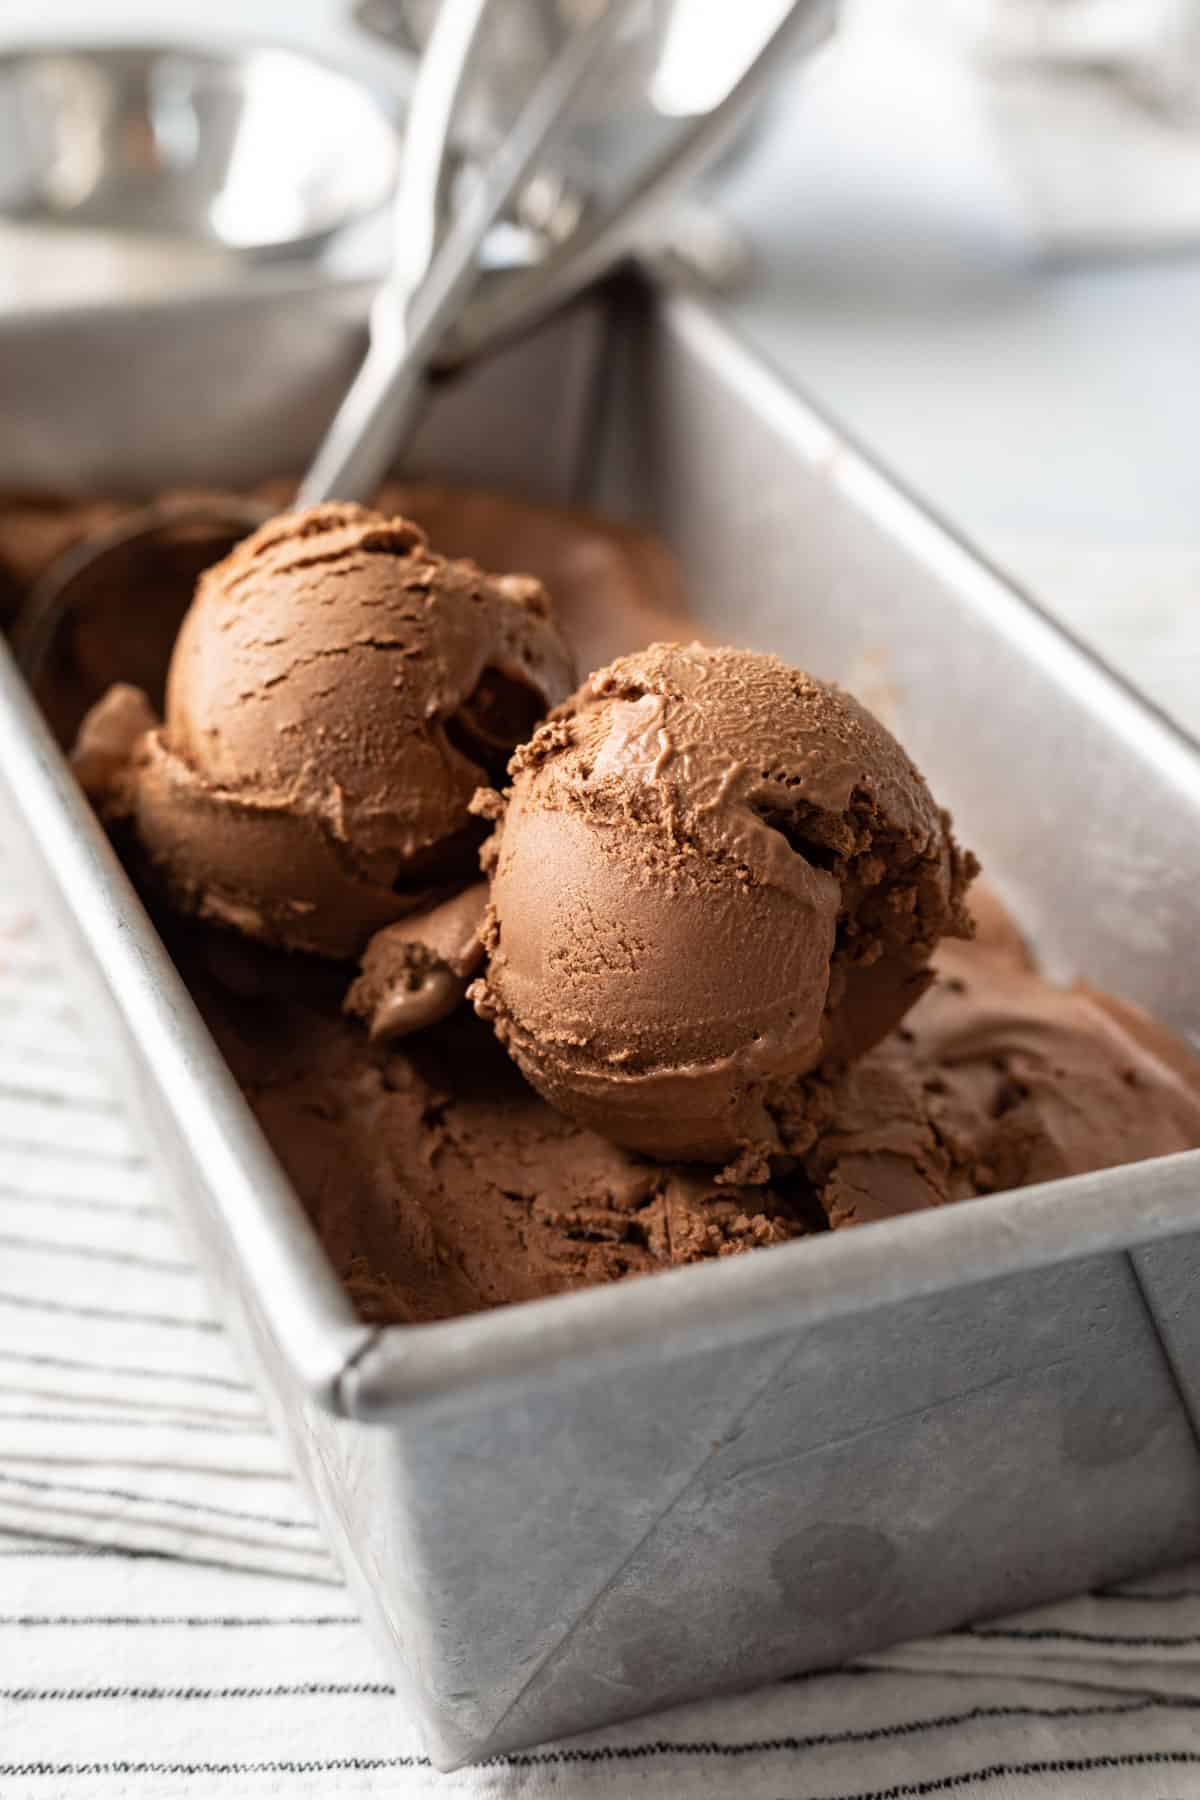 two scoops of nut-free vegan chocolate ice cream in a metal pan.